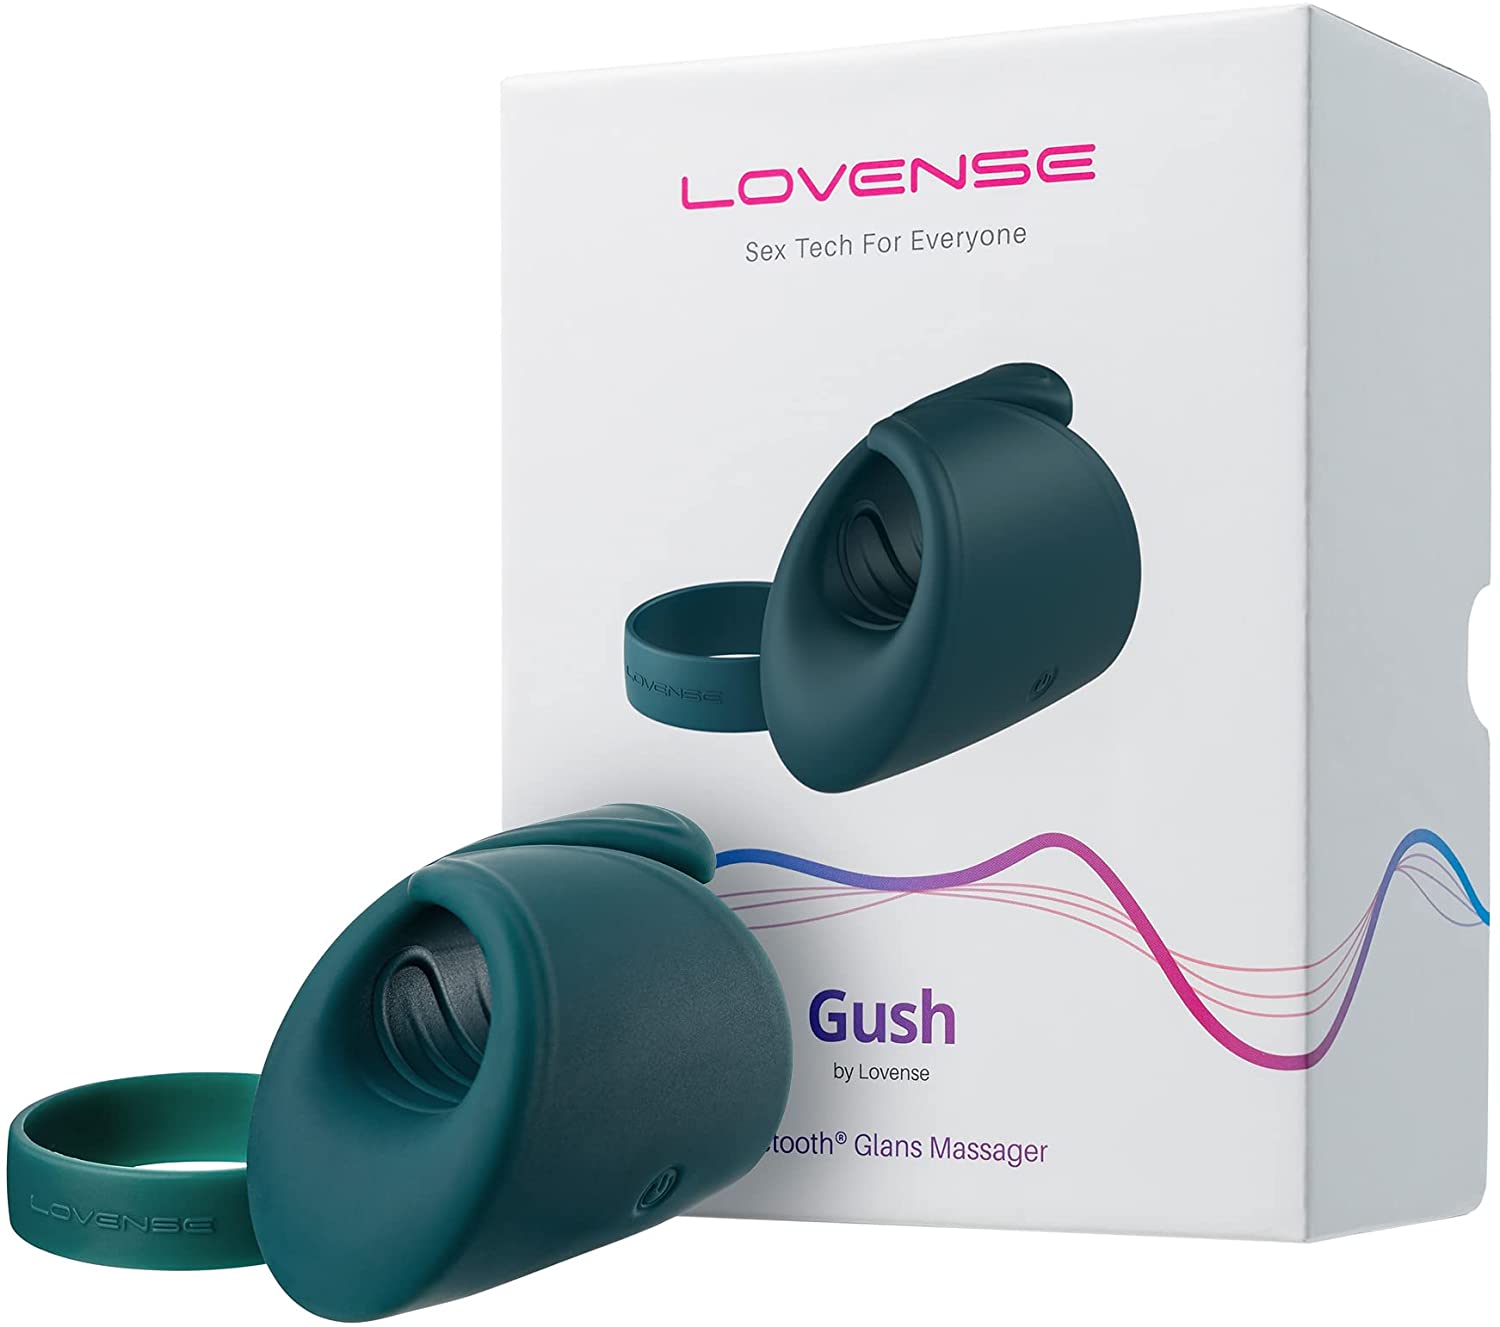 The Lovense Gush and its packaging.